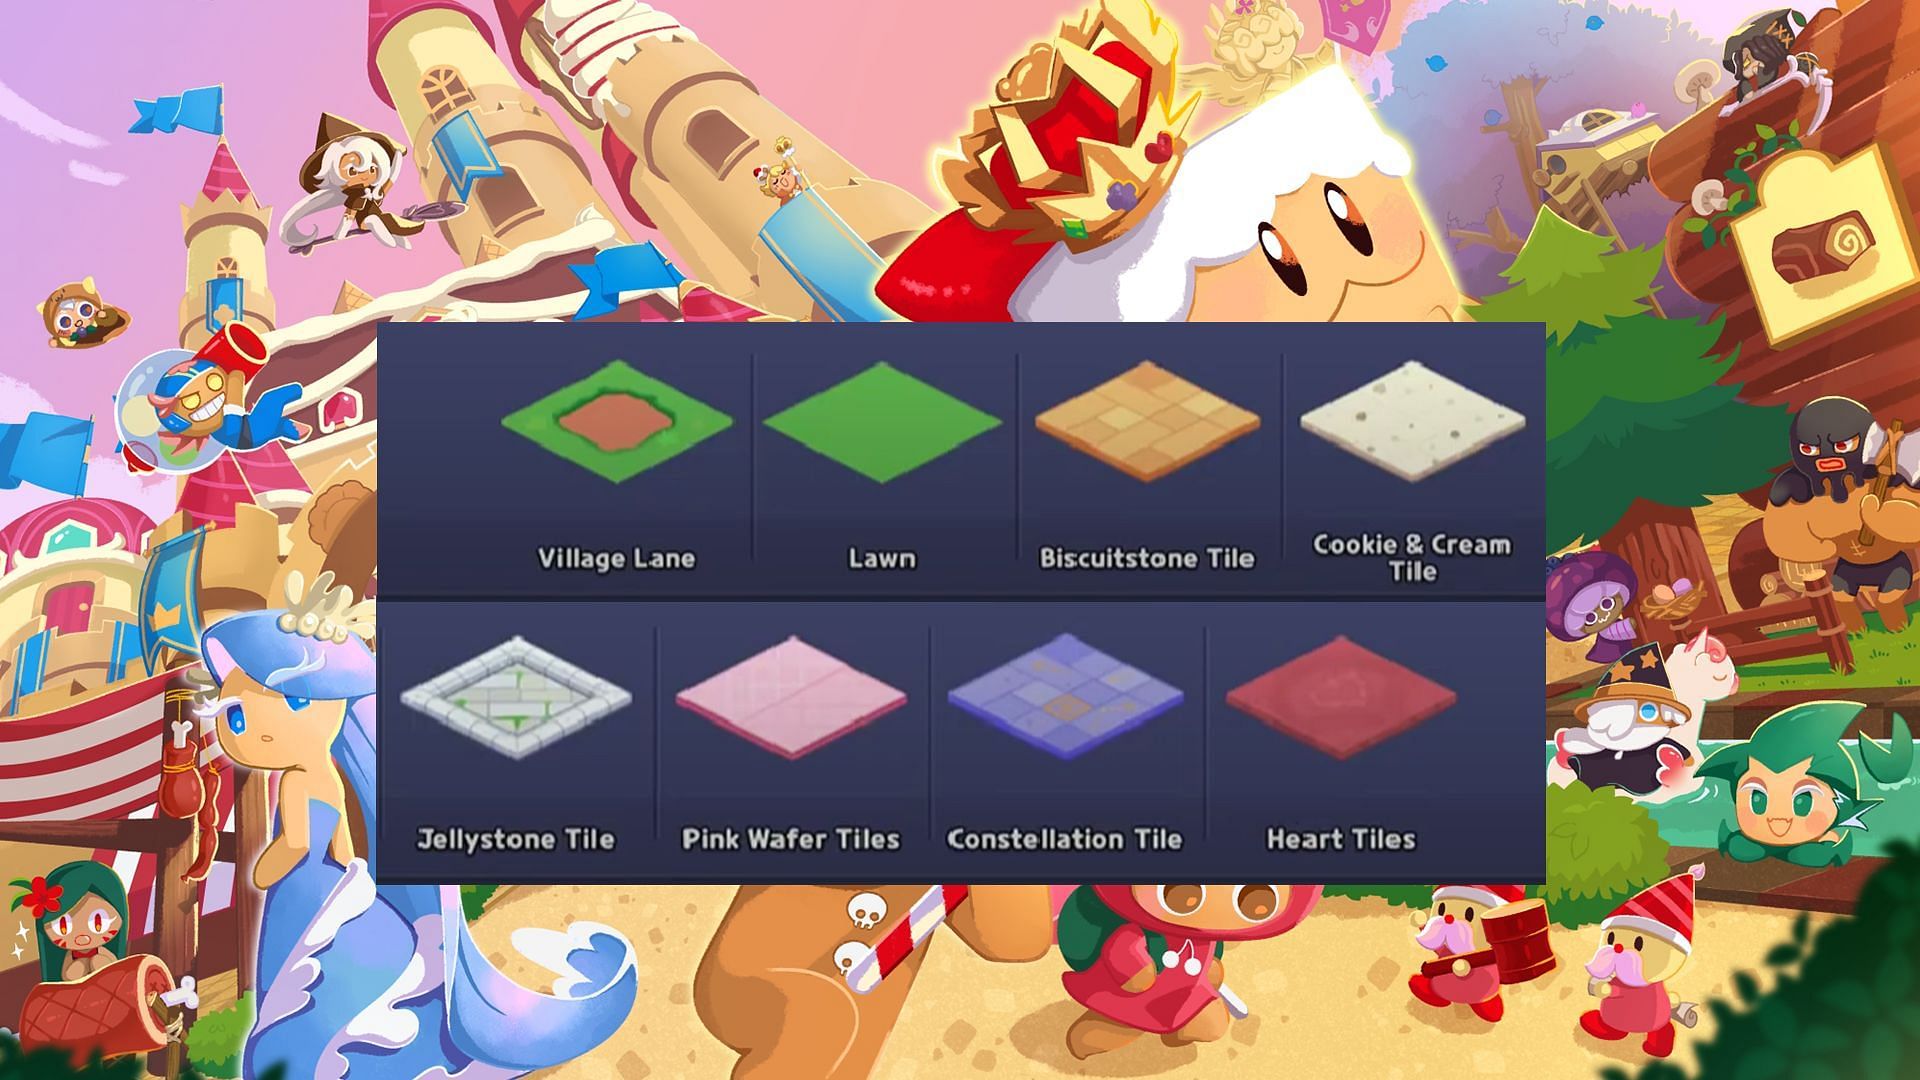 Players can use various Tiles to decorate their island in Cookie Run Kingdom (Image via Sportskeeda)